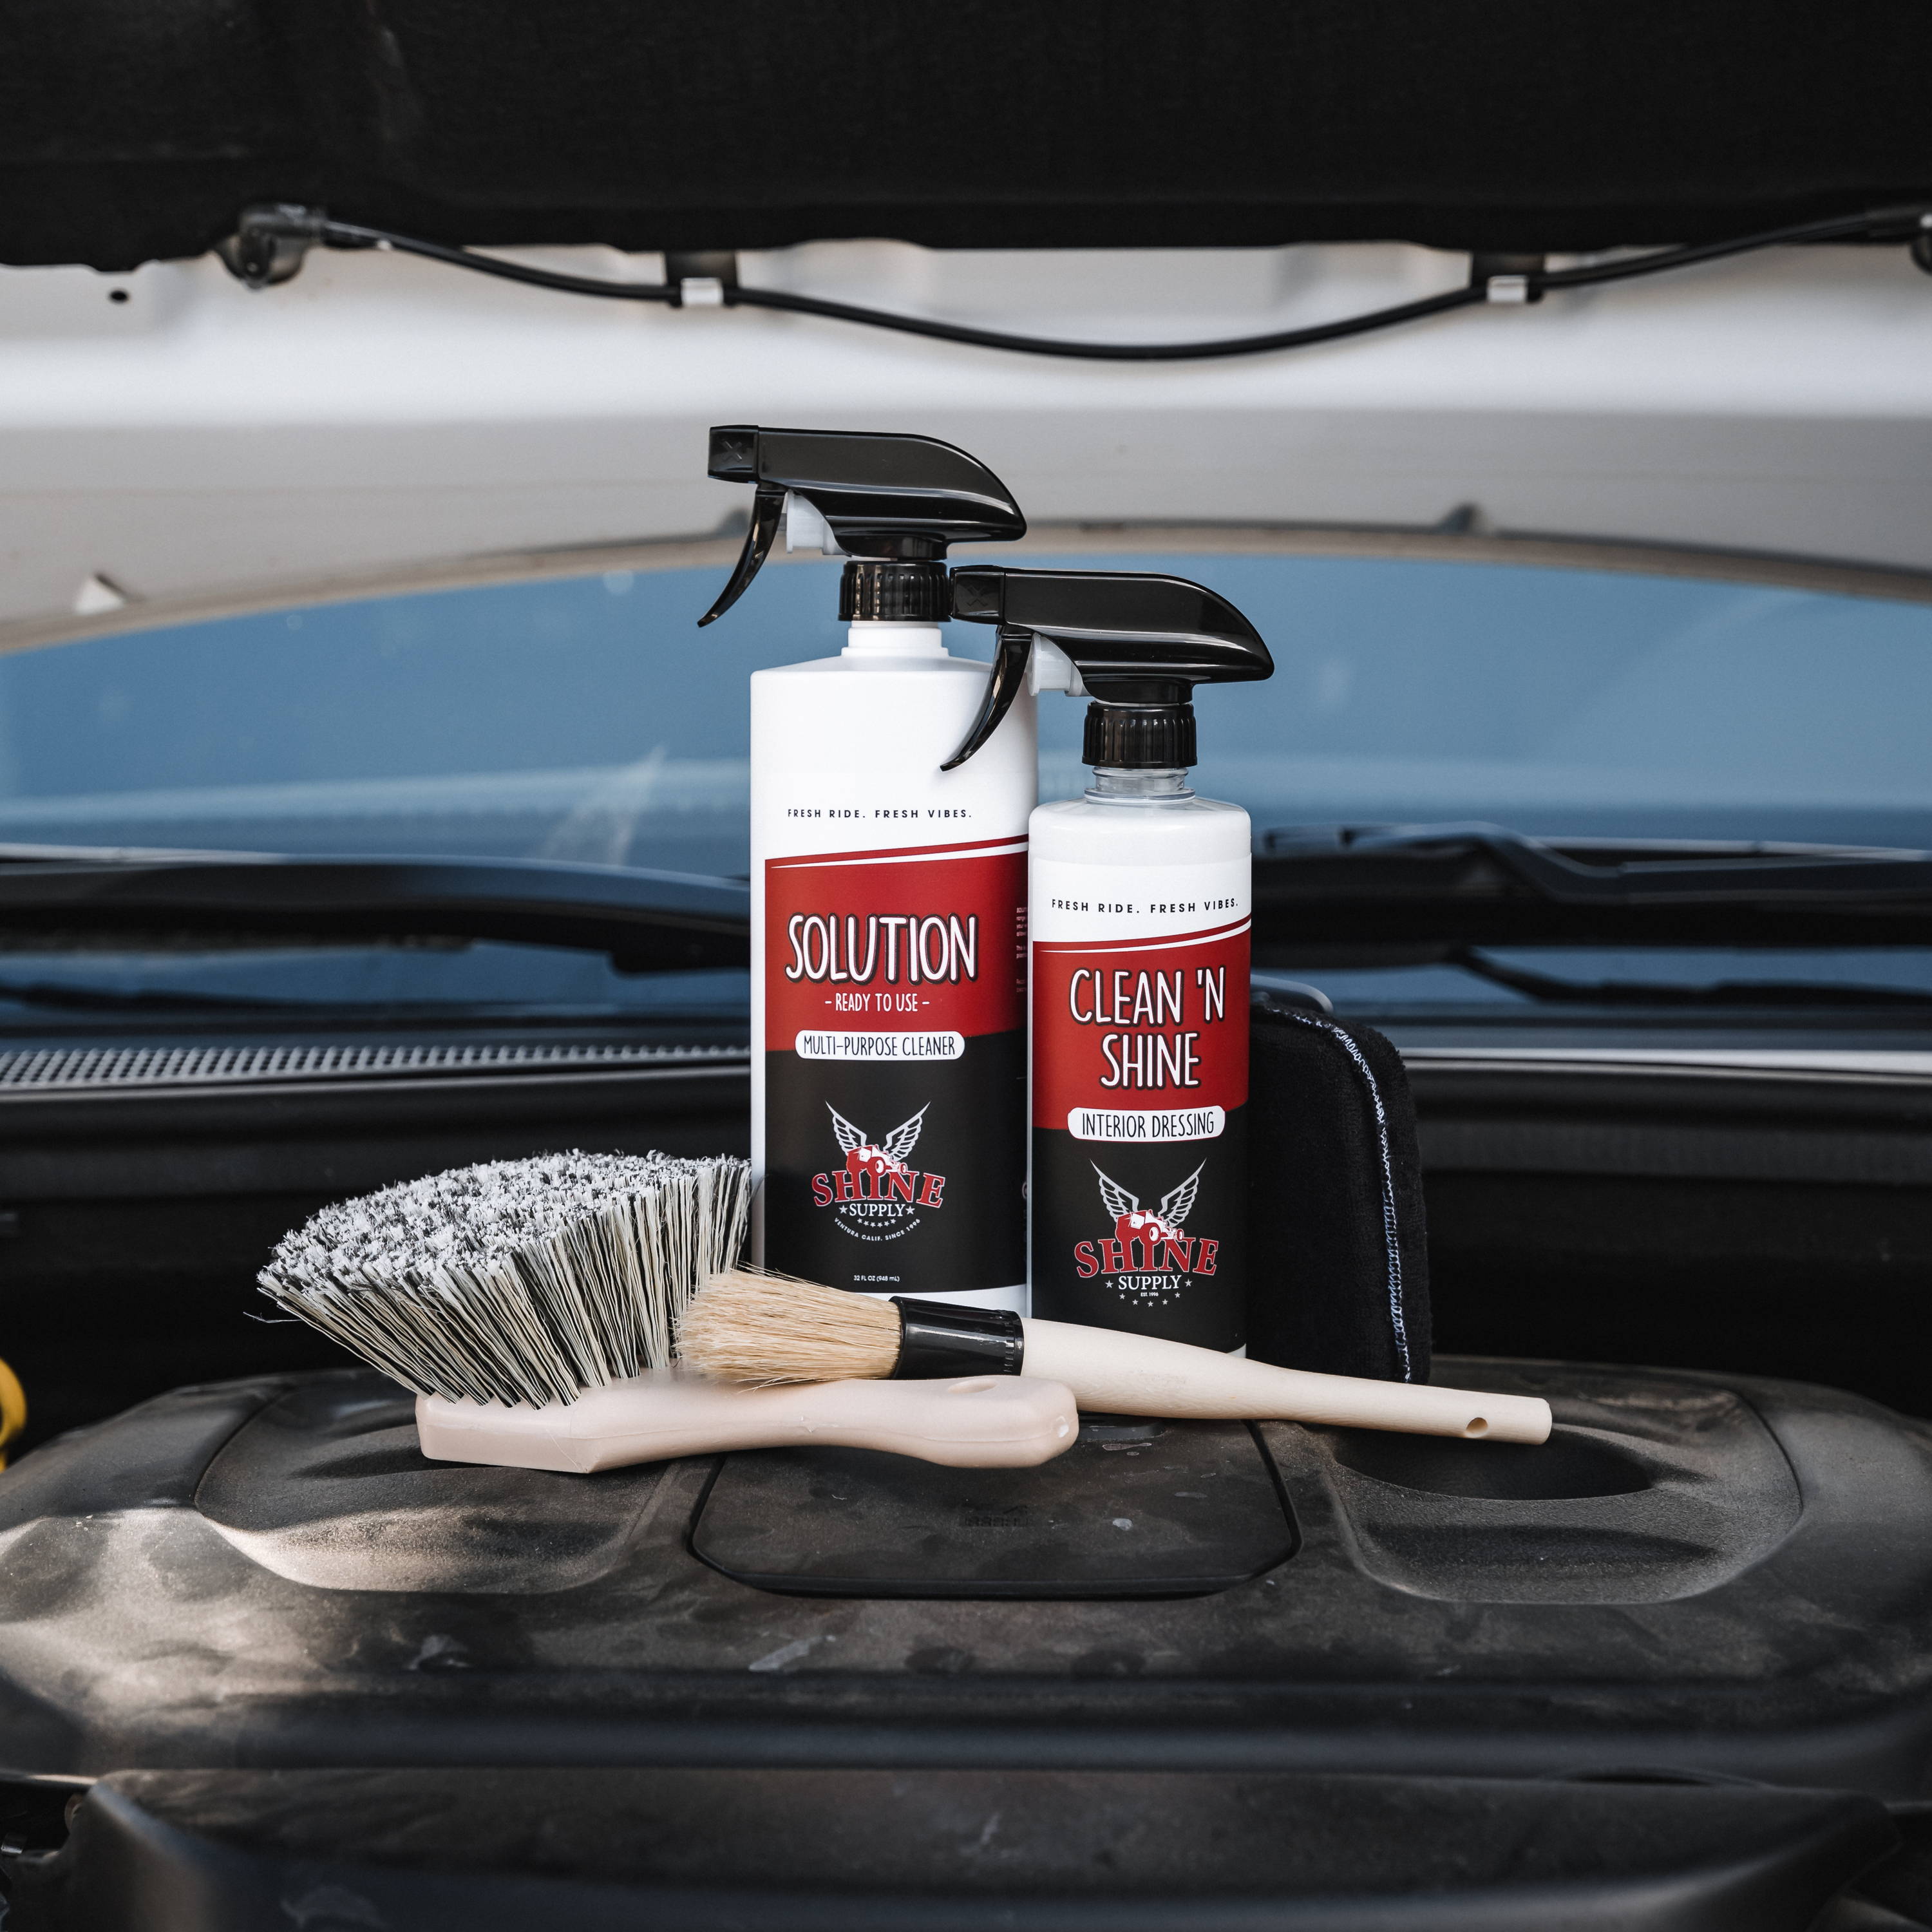 Car Engine Bay Cleaner Powerful Decontamination Cleaning Maintenance  Supplies